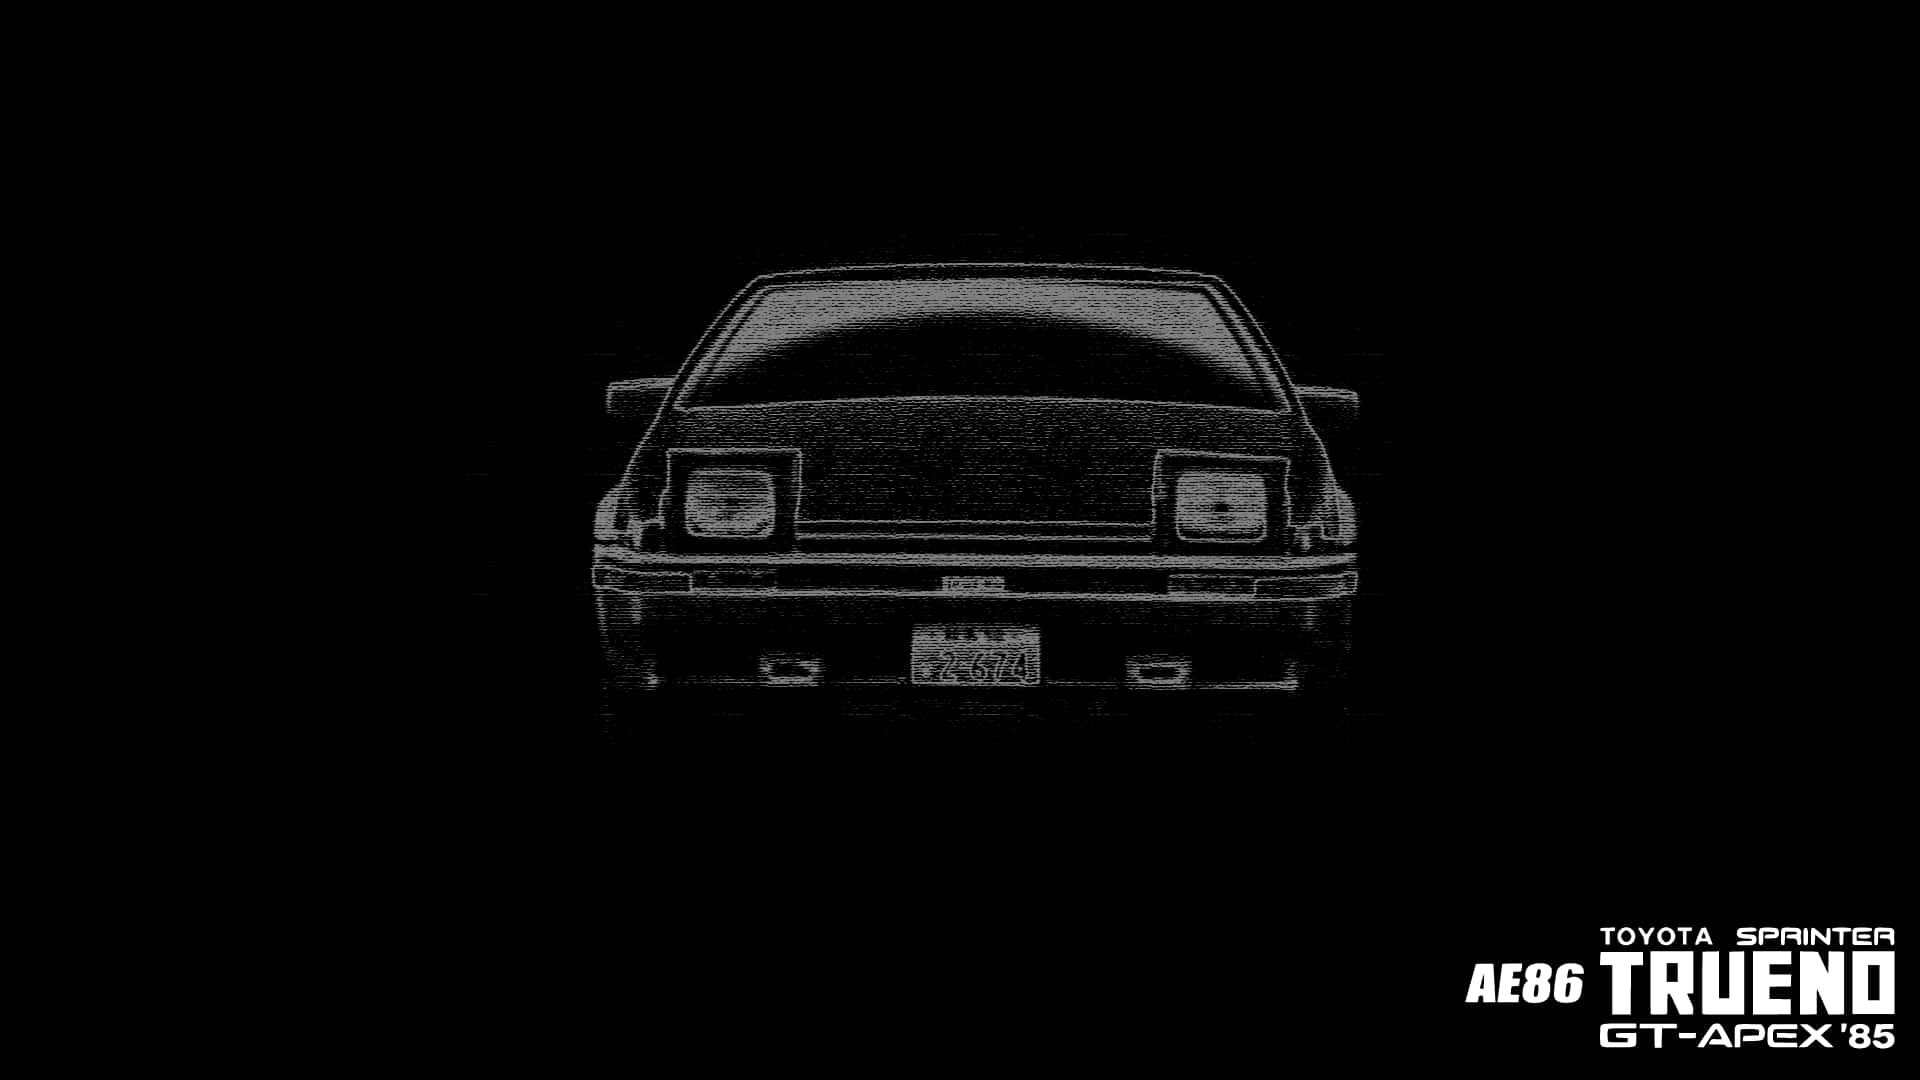 A Black And White Image Of A Car Wallpaper